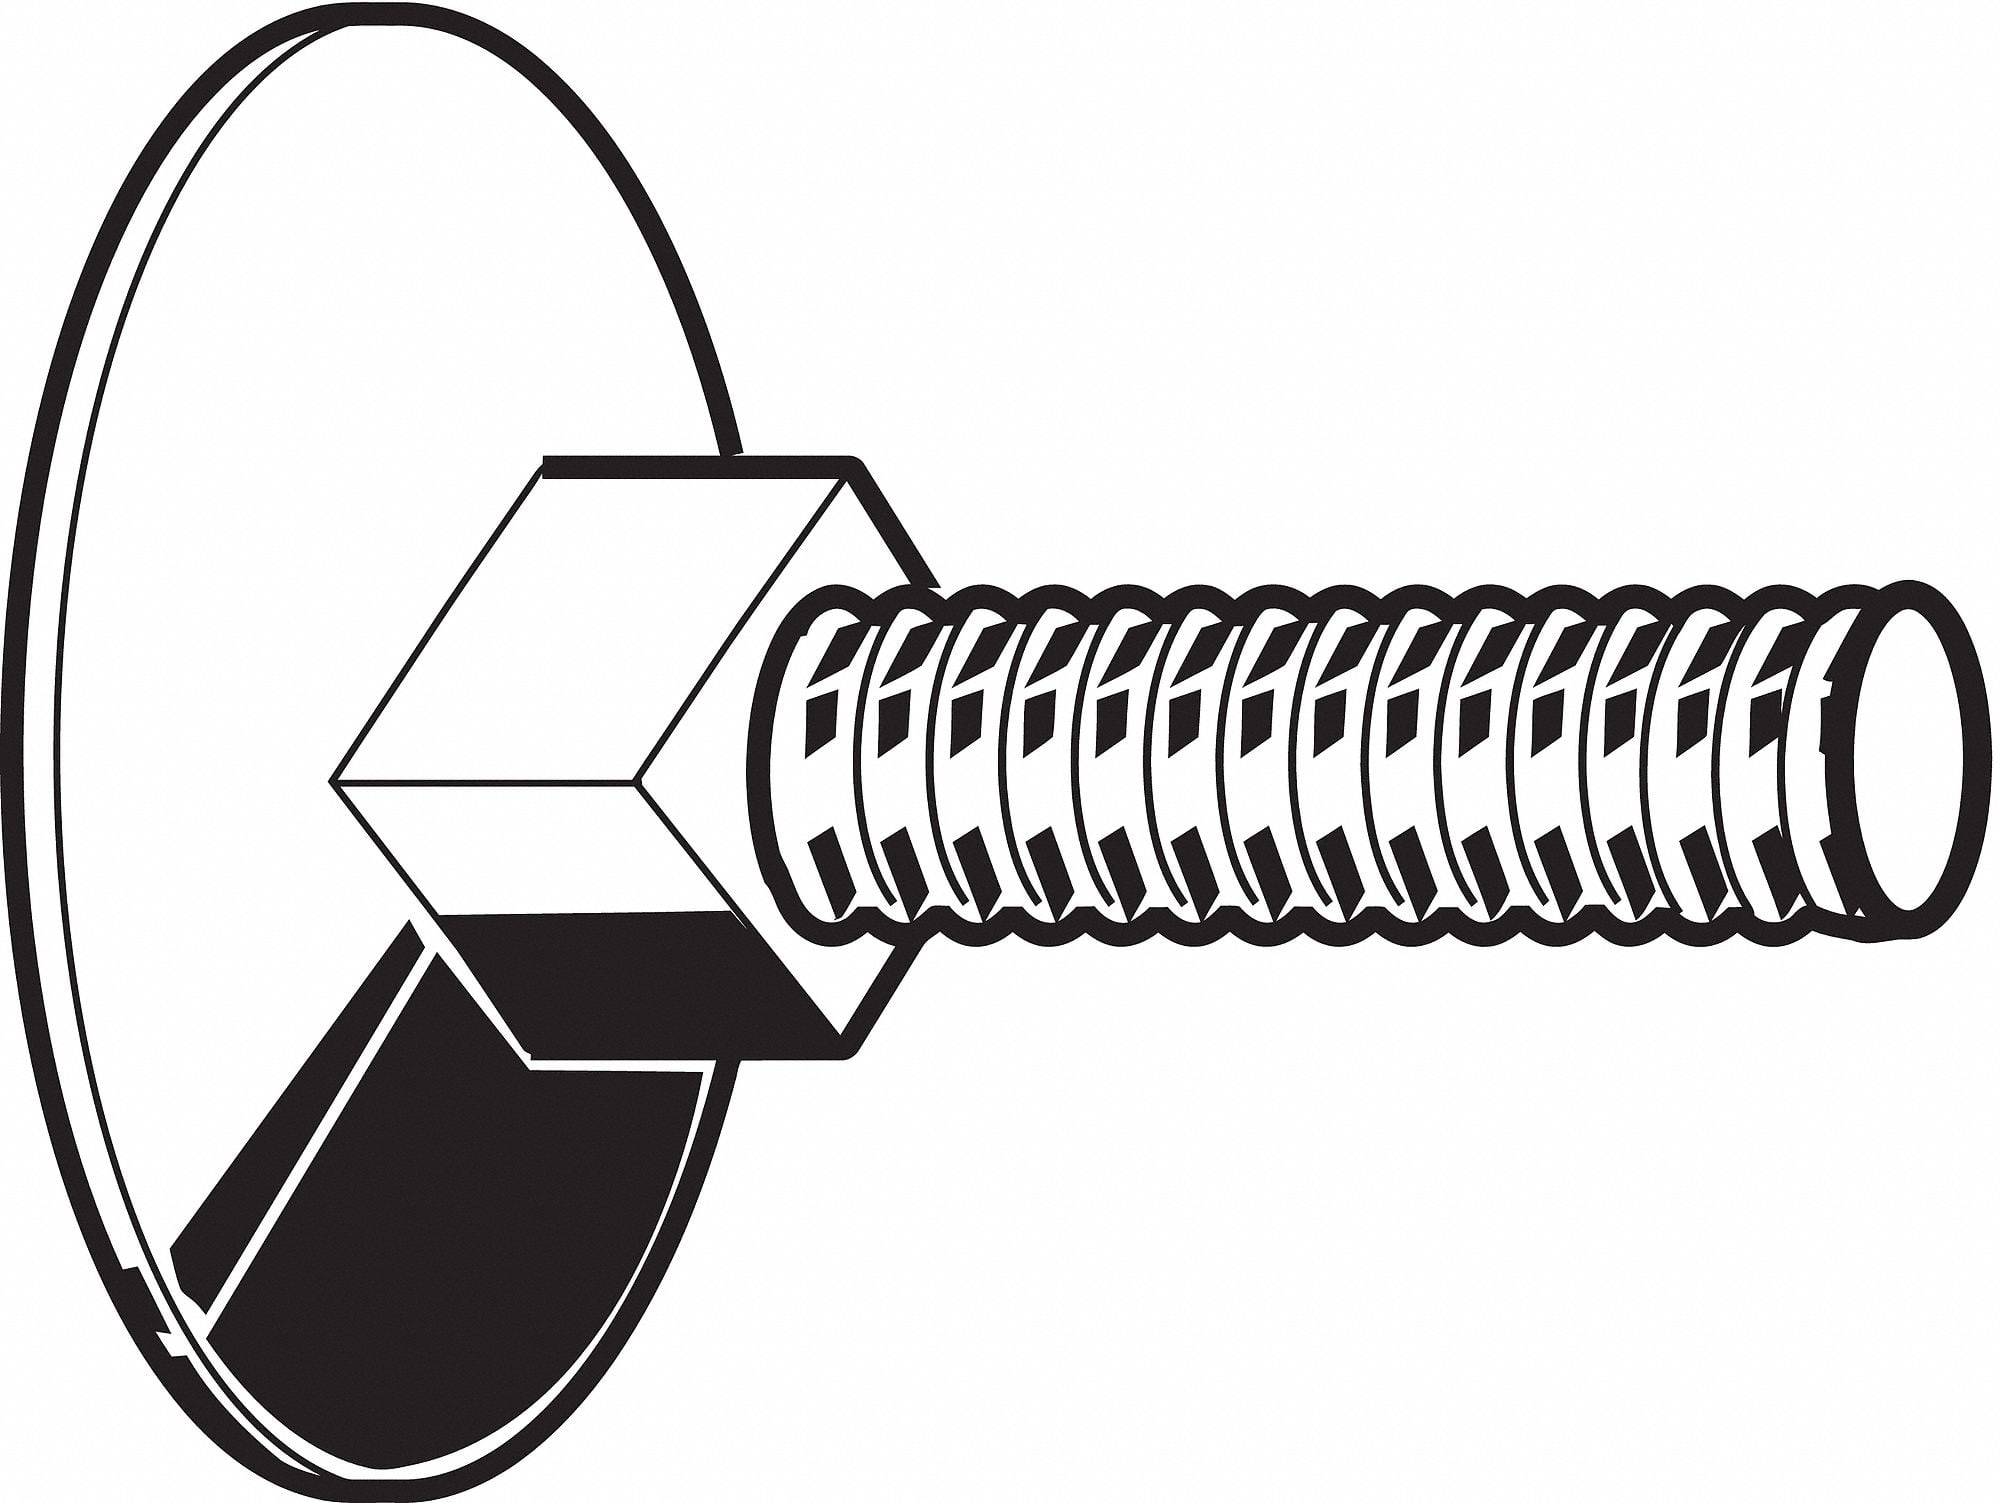 3/8-16 x 6 in Pk10 Carriage Bolt 